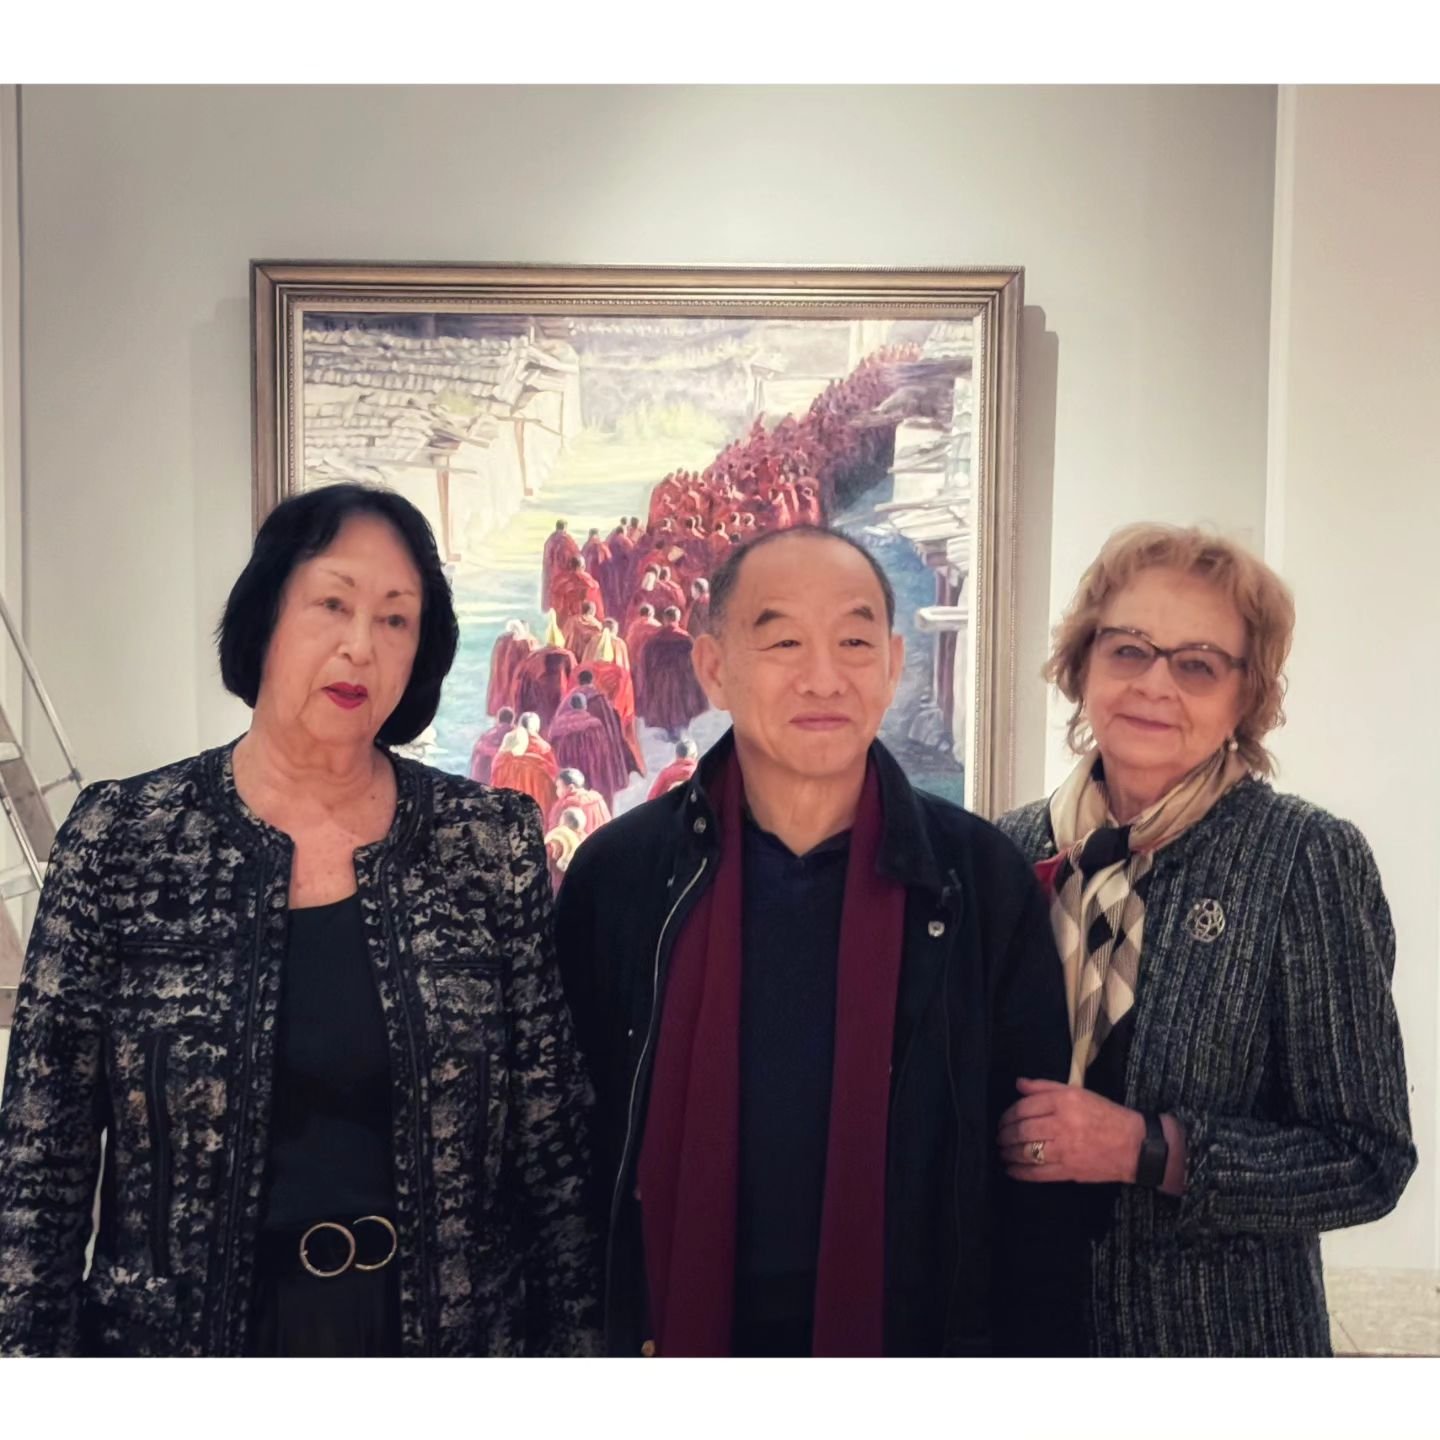 Opening and installation of my solo show at Tretyakov Museum 
.....
Han Yuchen's Painting Exhibition opening Tretyakov Museum. This is Han Yuchen's third exhibition in Russia, following exhibitions in 2015 at the Repin Academy of Arts and in 2023 at 